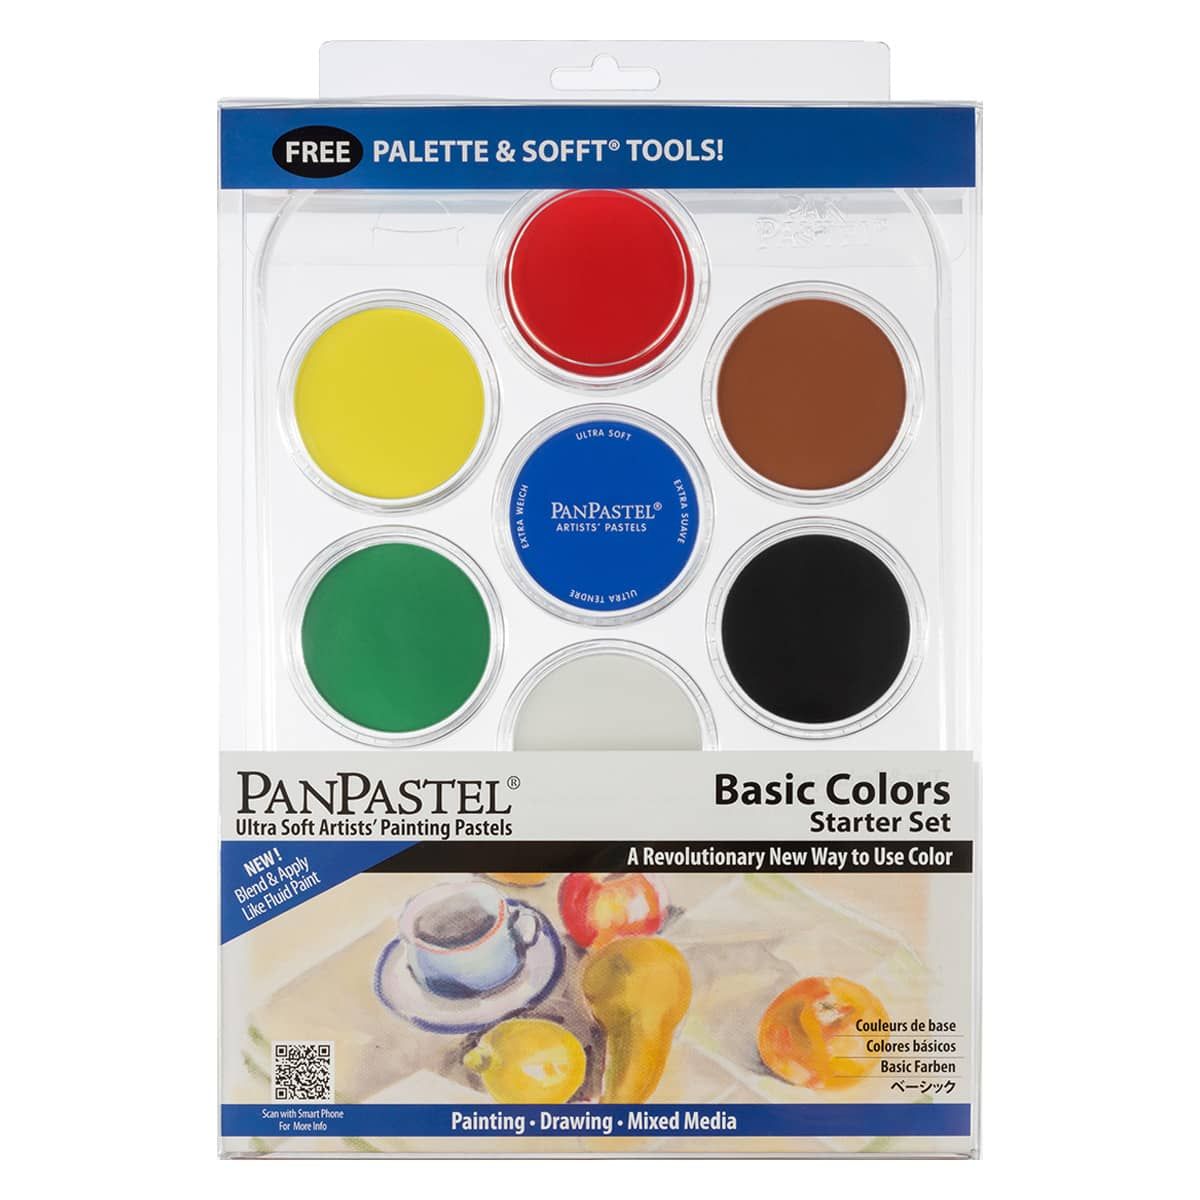 PanPastel™ Artists' Pastels - Mixed Media Kit I, Set of 7 with Palette